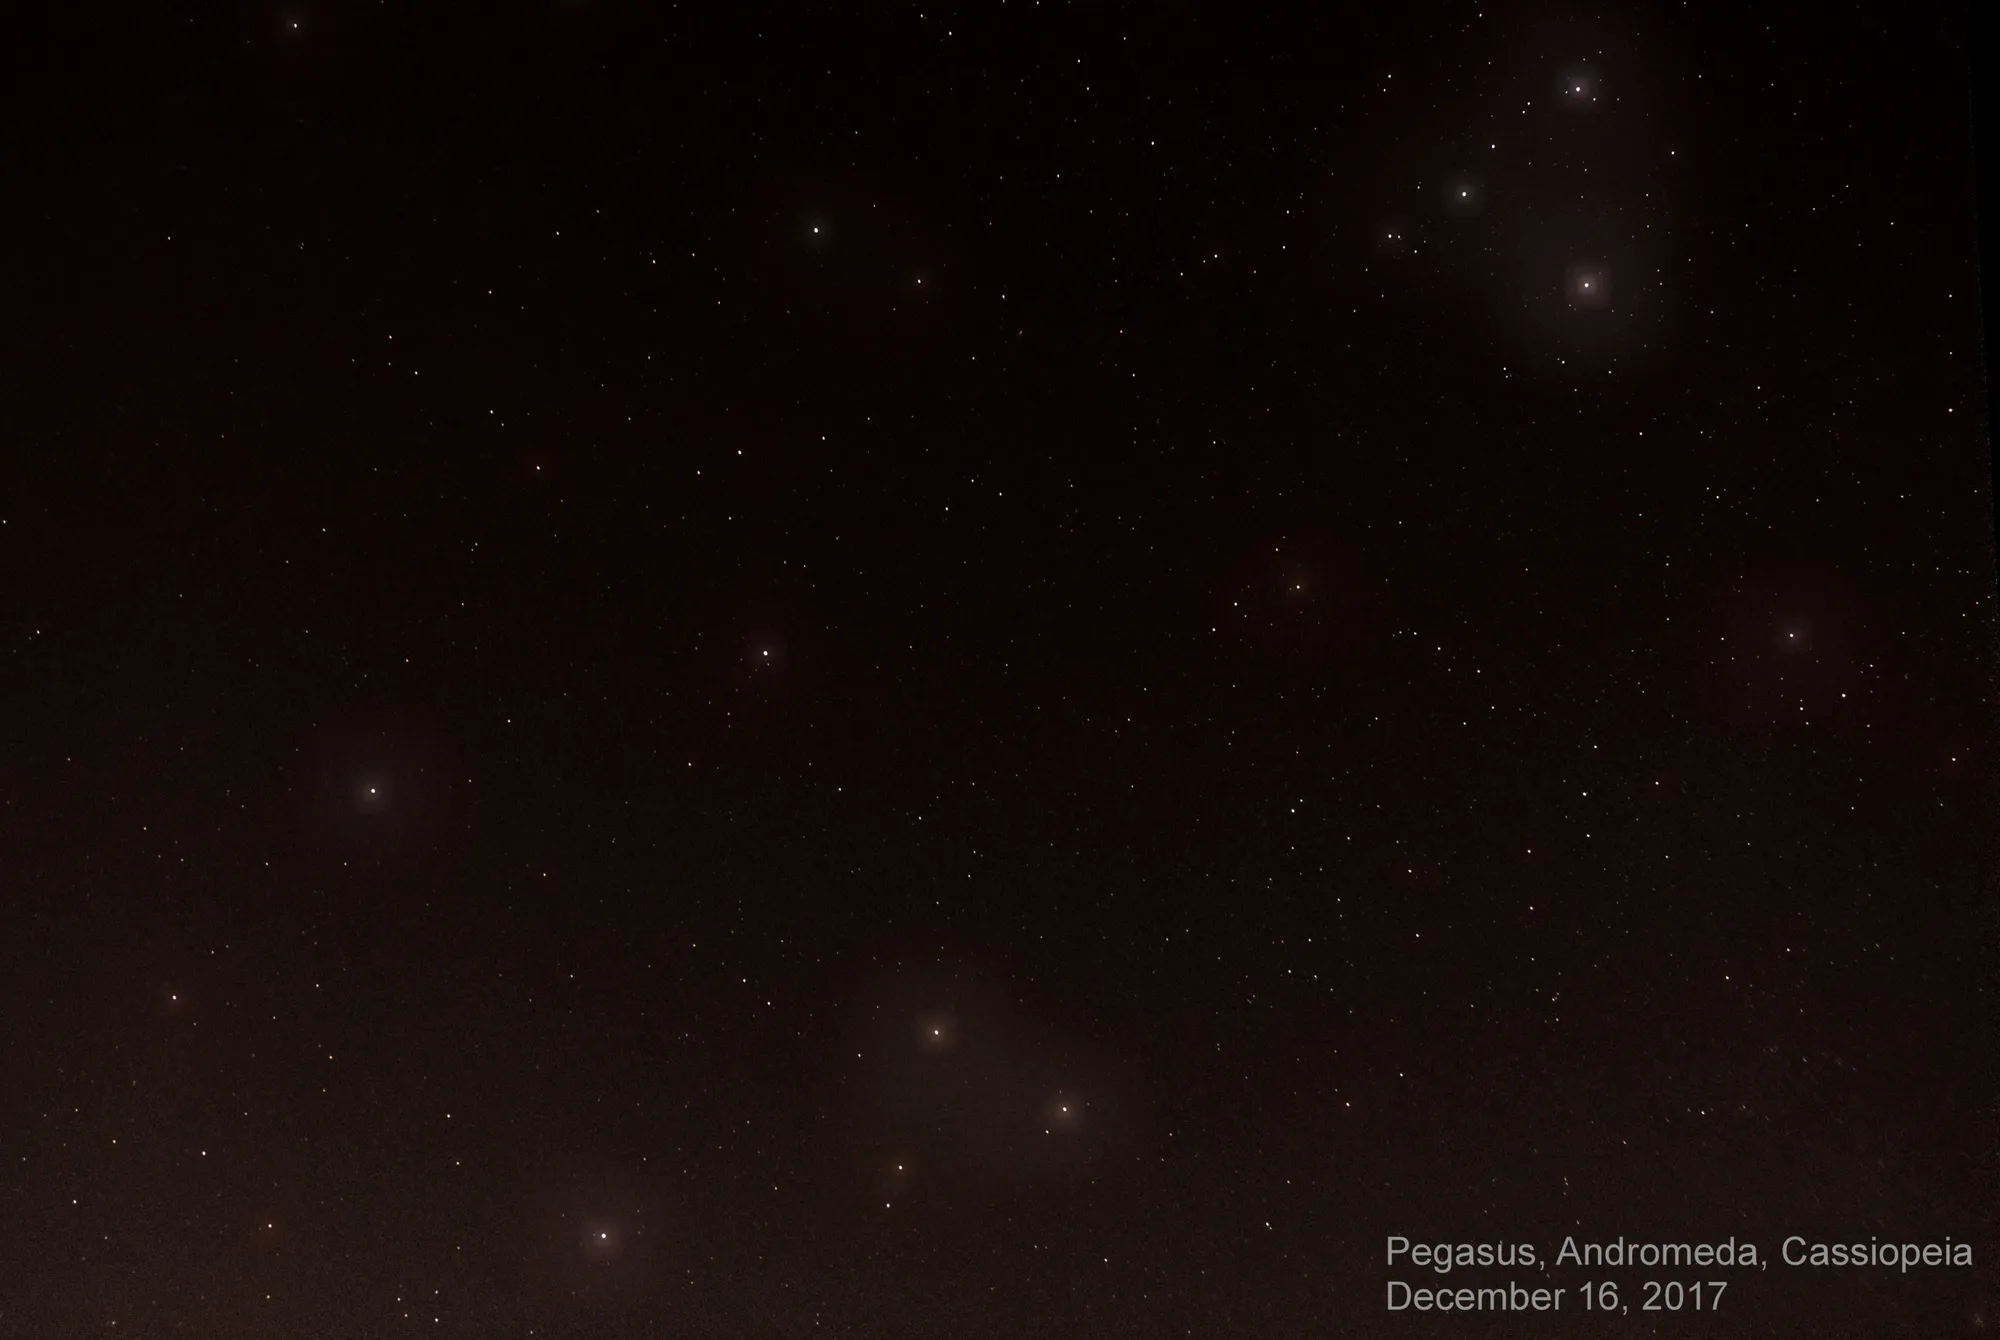 Constellations VI: Pegasus, Andromeda, Cassiopeia, and the Quest for the Andromeda Galaxy